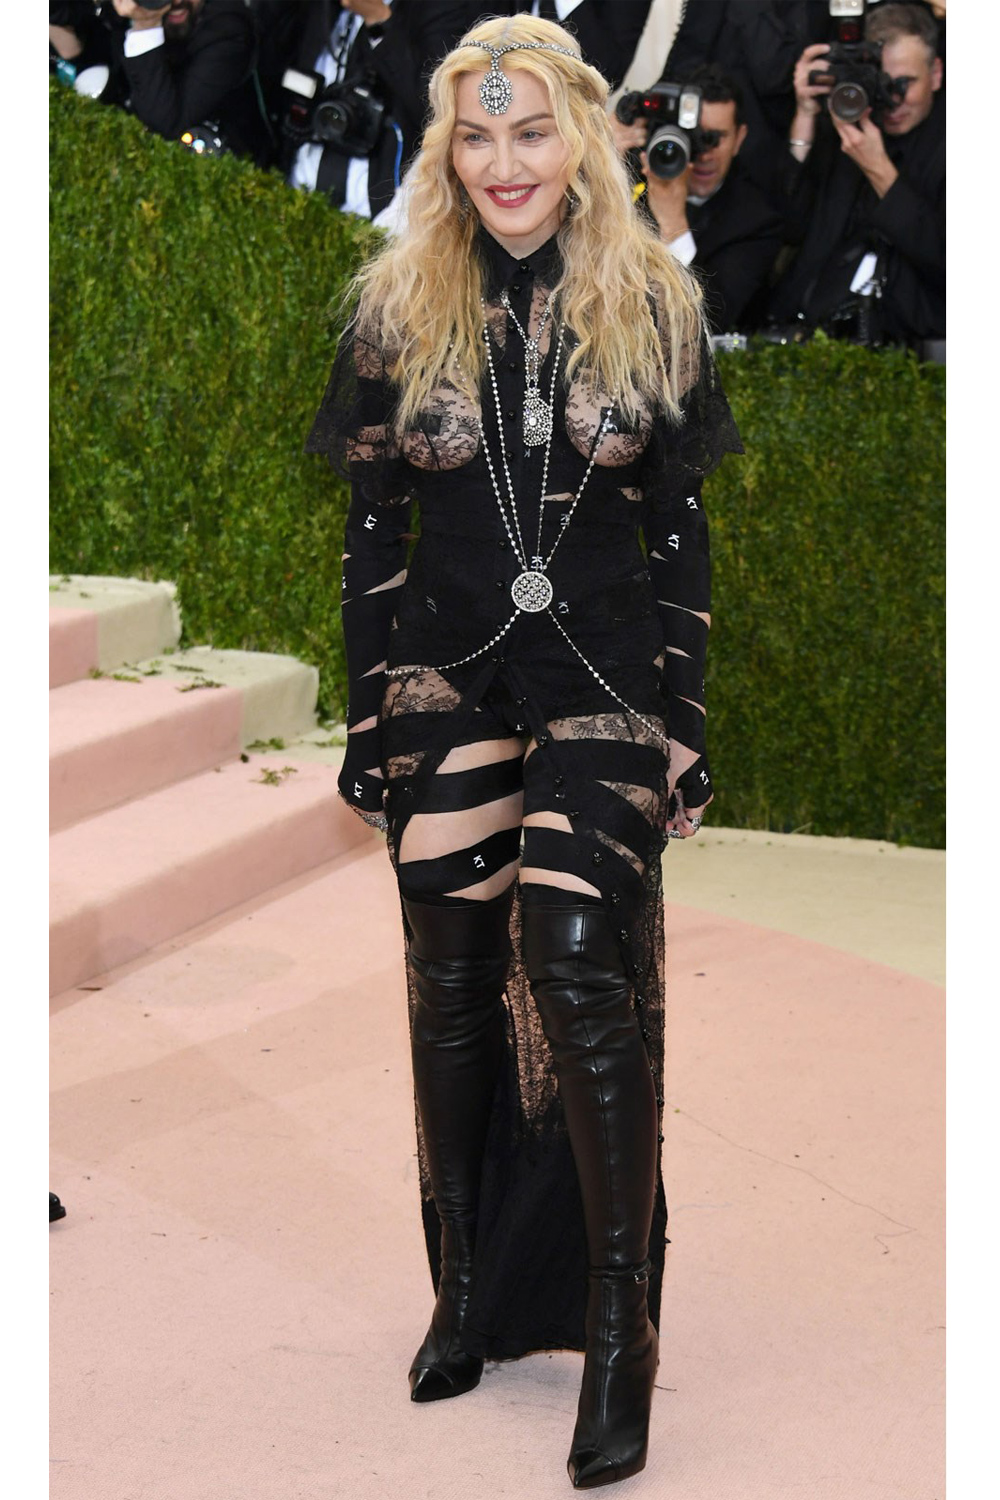 Madonna arrives at the 2016 Met Gala in New York.